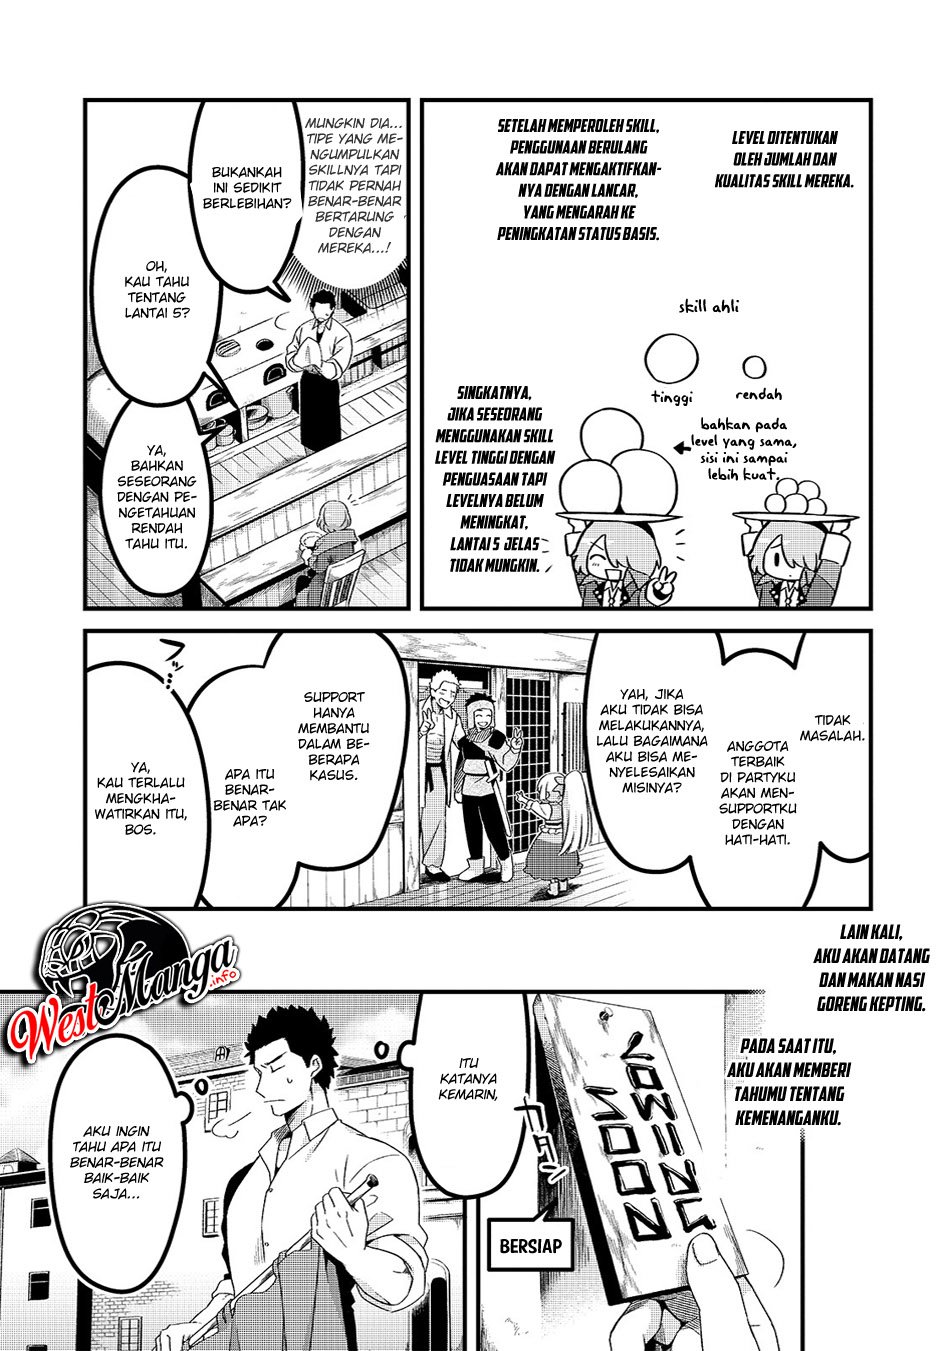 Baca Welcome to Cheap Restaurant of Outcasts! Chapter 3  - GudangKomik